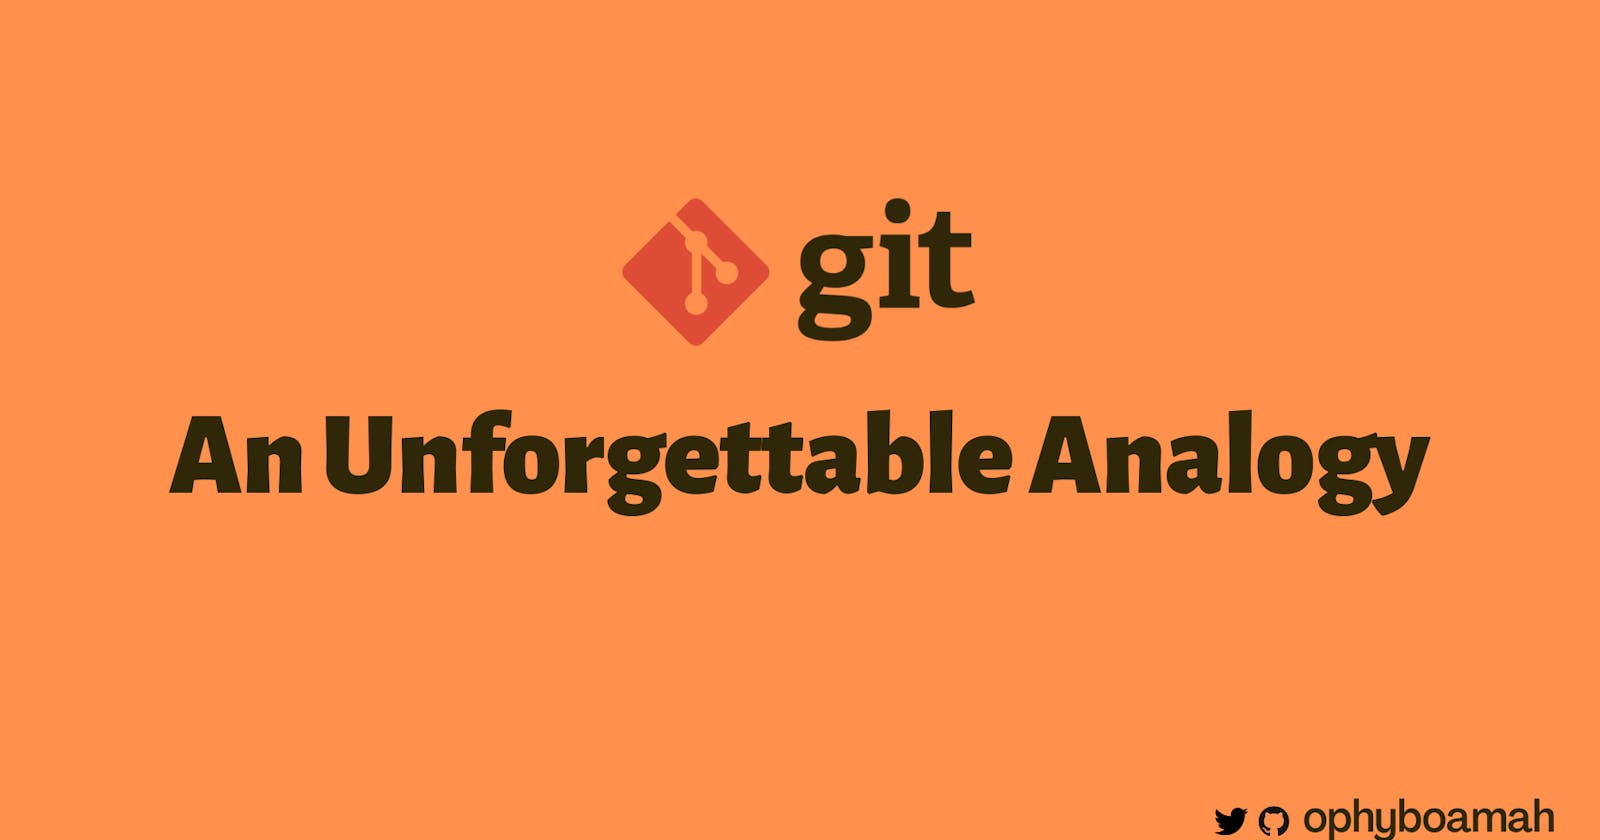 Git: An Unforgettable Analogy